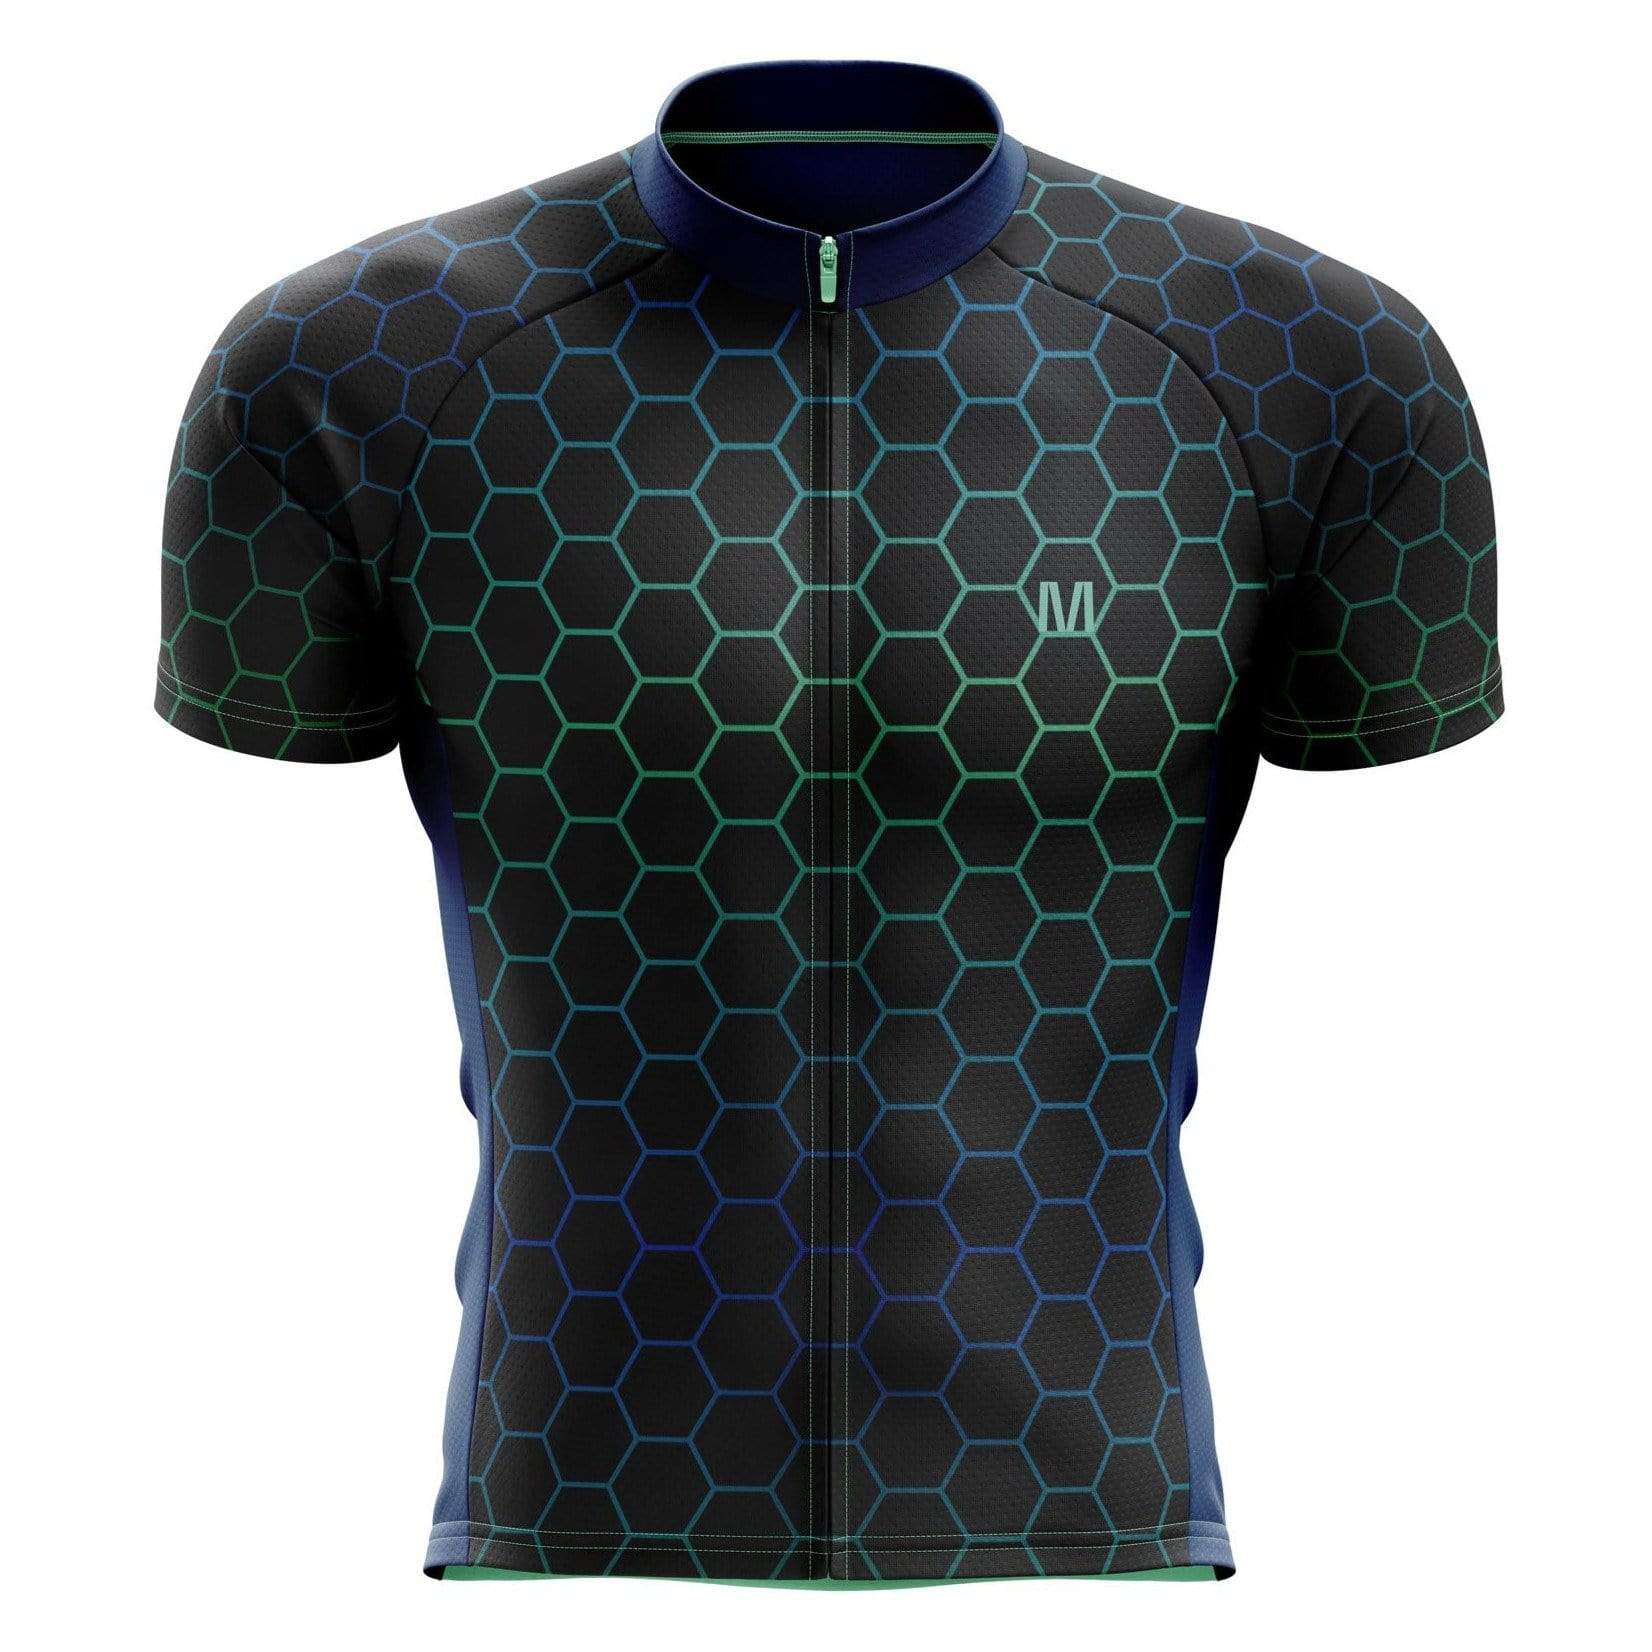 Breathable fabric in an awesome hex pattern.